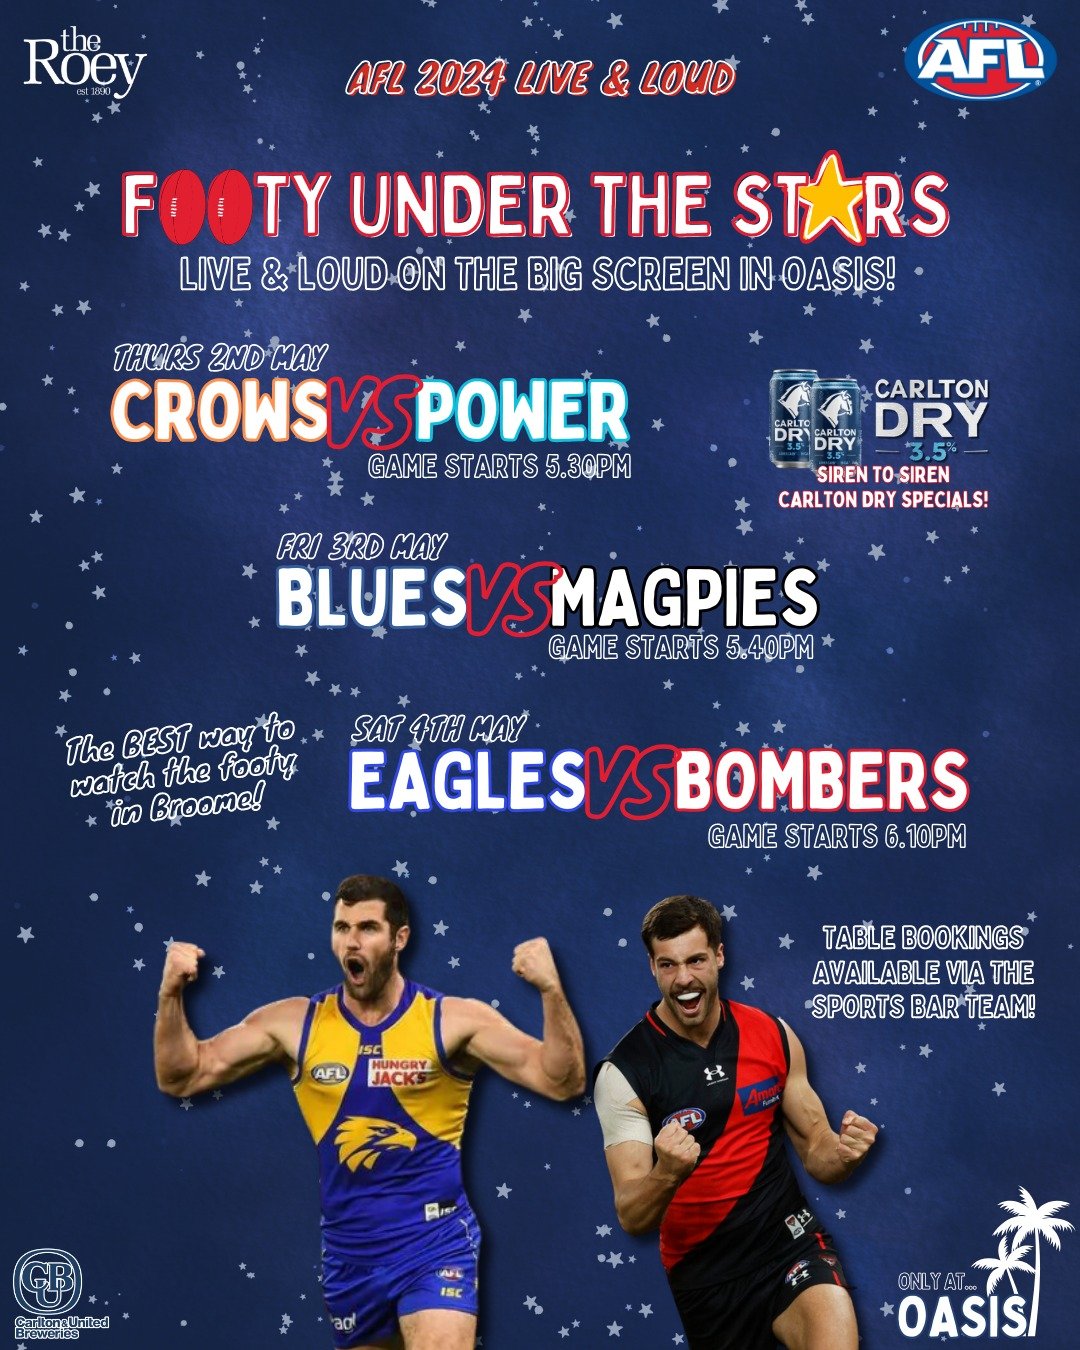 The Roey is your place to catch EVERY GAME of the 2024 AFL &amp; NRL Seasons live &amp; loud 🏉📣

Not only are we screening ALL GAMES in our Sports Bar, but we will also be screening AFL NIGHT GAMES on the biiiiig screen with the ever biiiiiiger sou